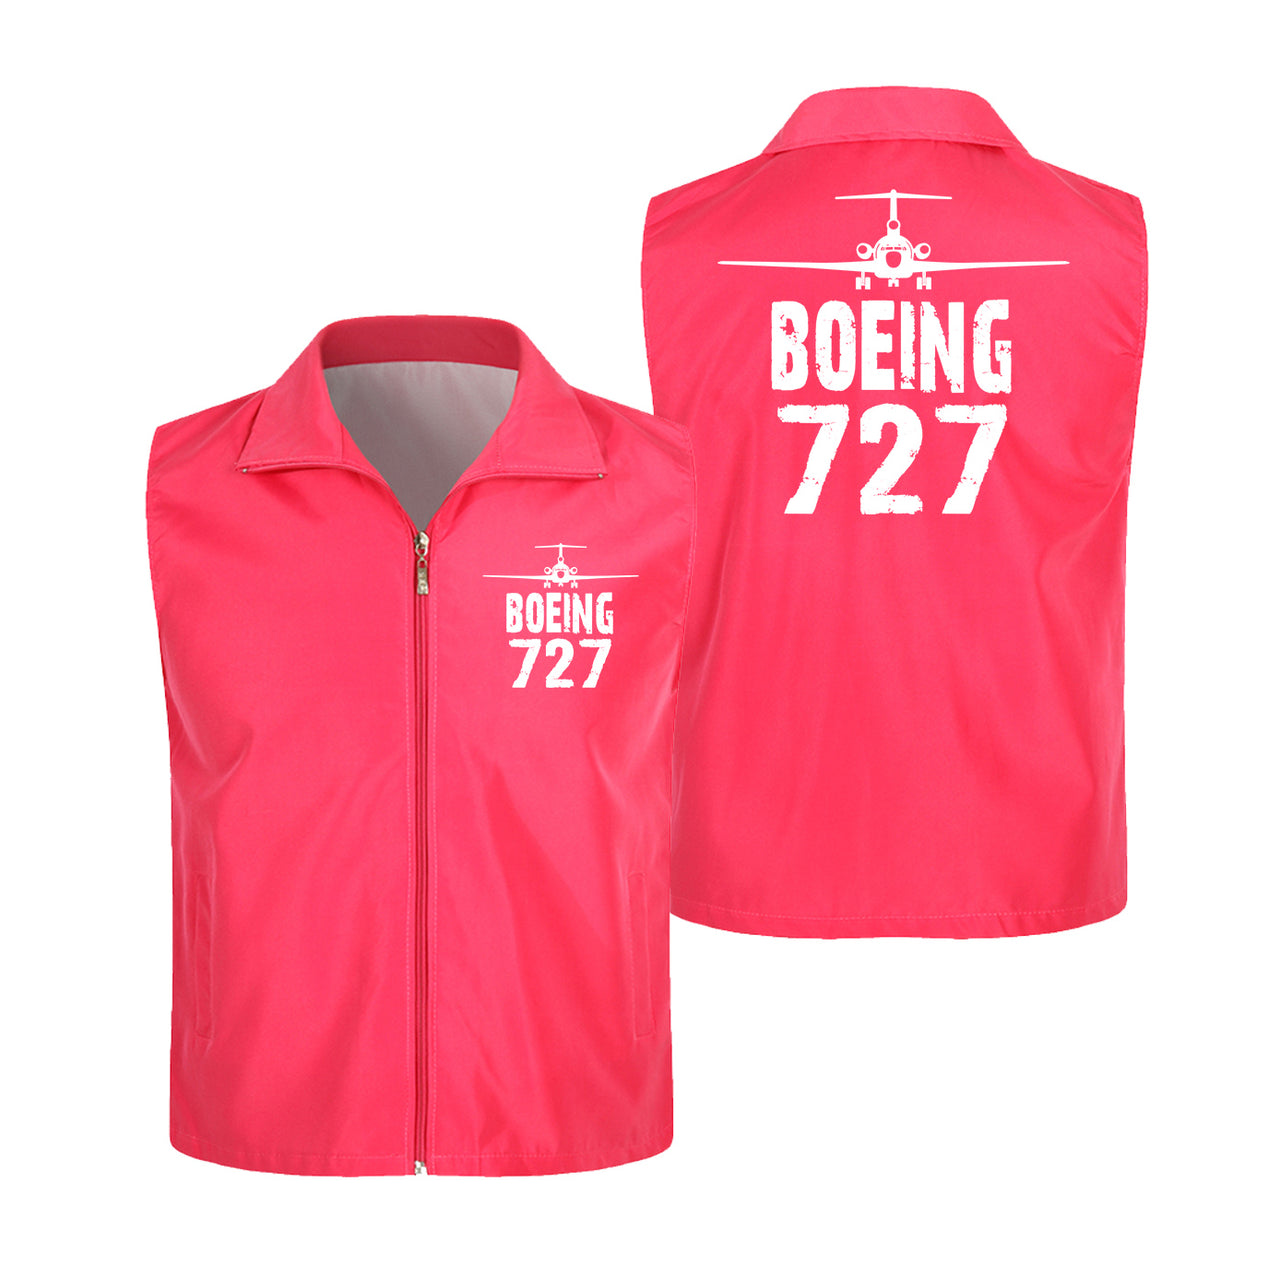 Boeing 727 & Plane Designed Thin Style Vests